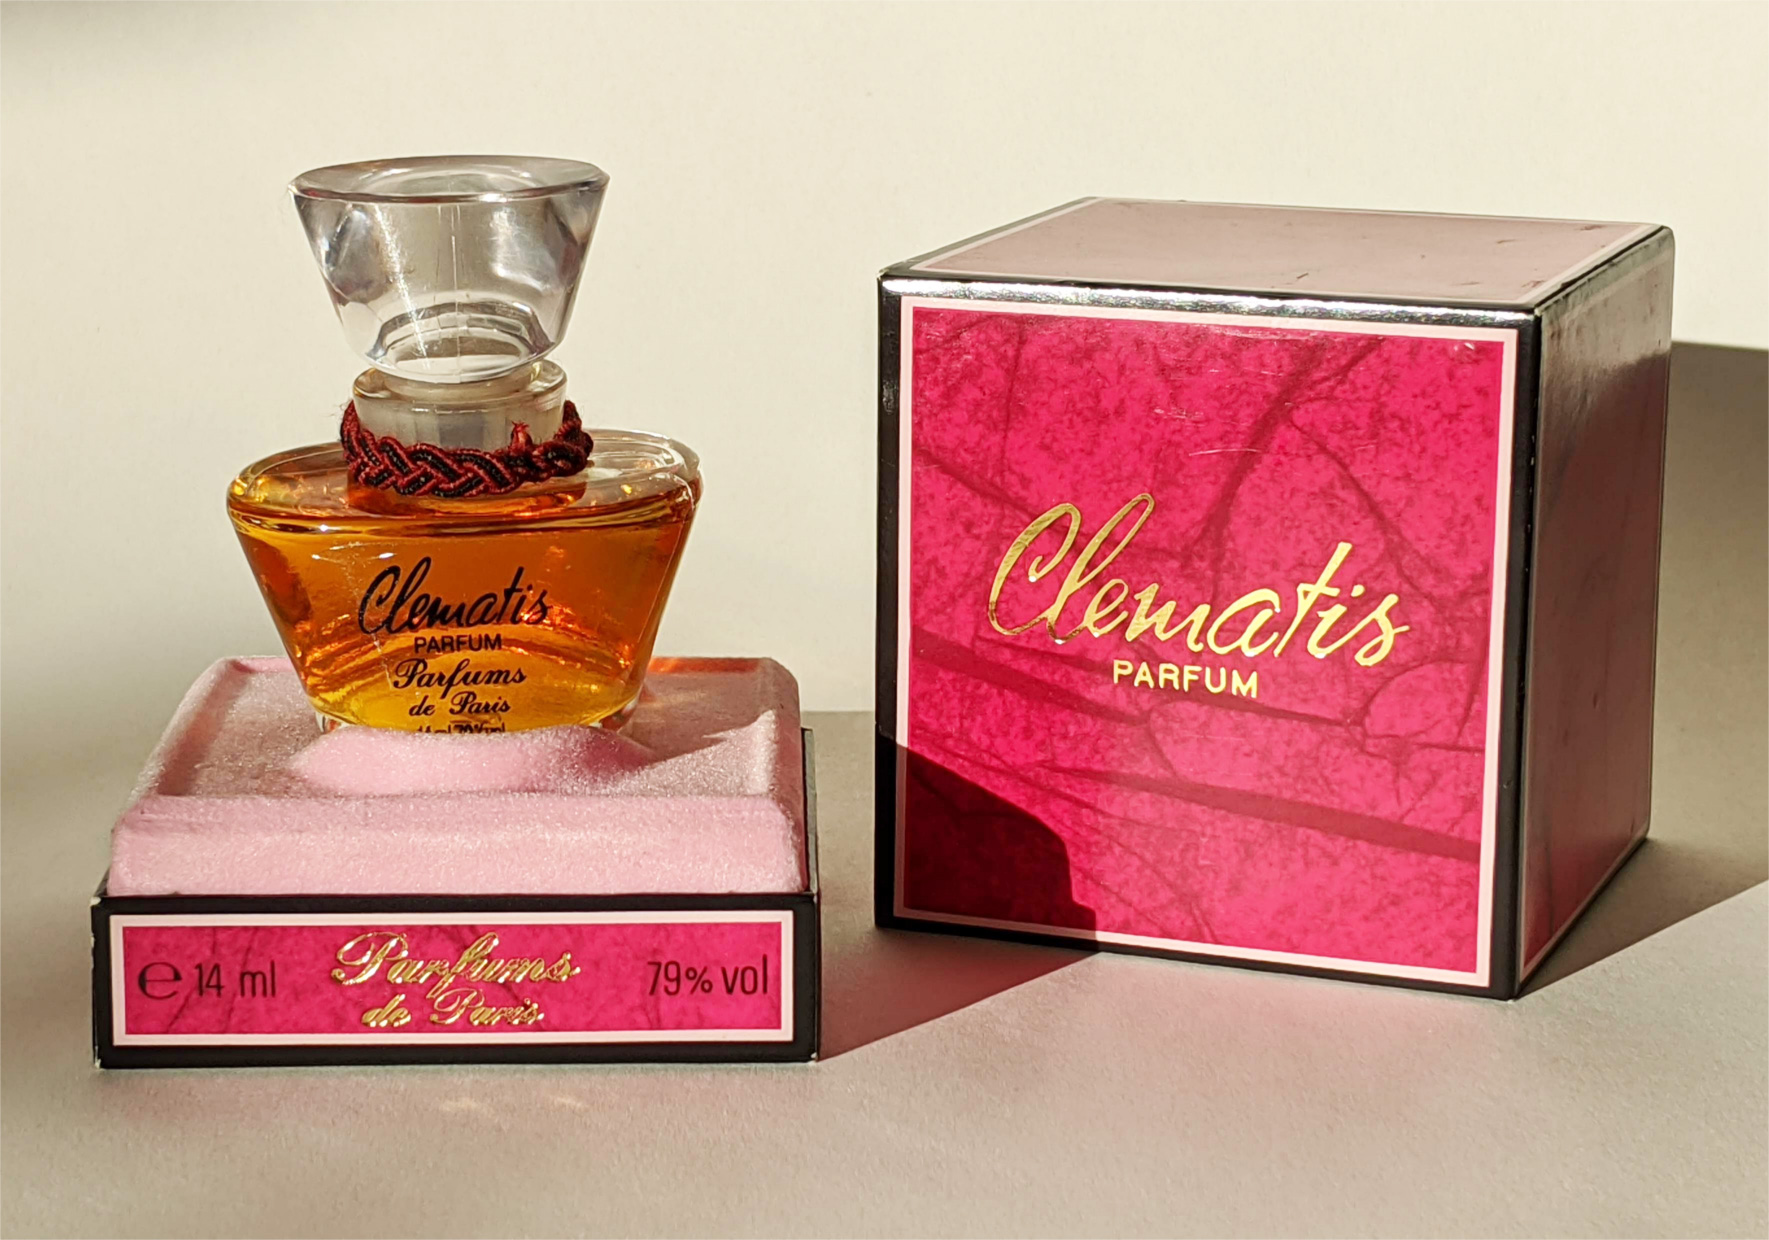 Vintage Perfume Bottles and Their Modern Copycats - Yesterday's